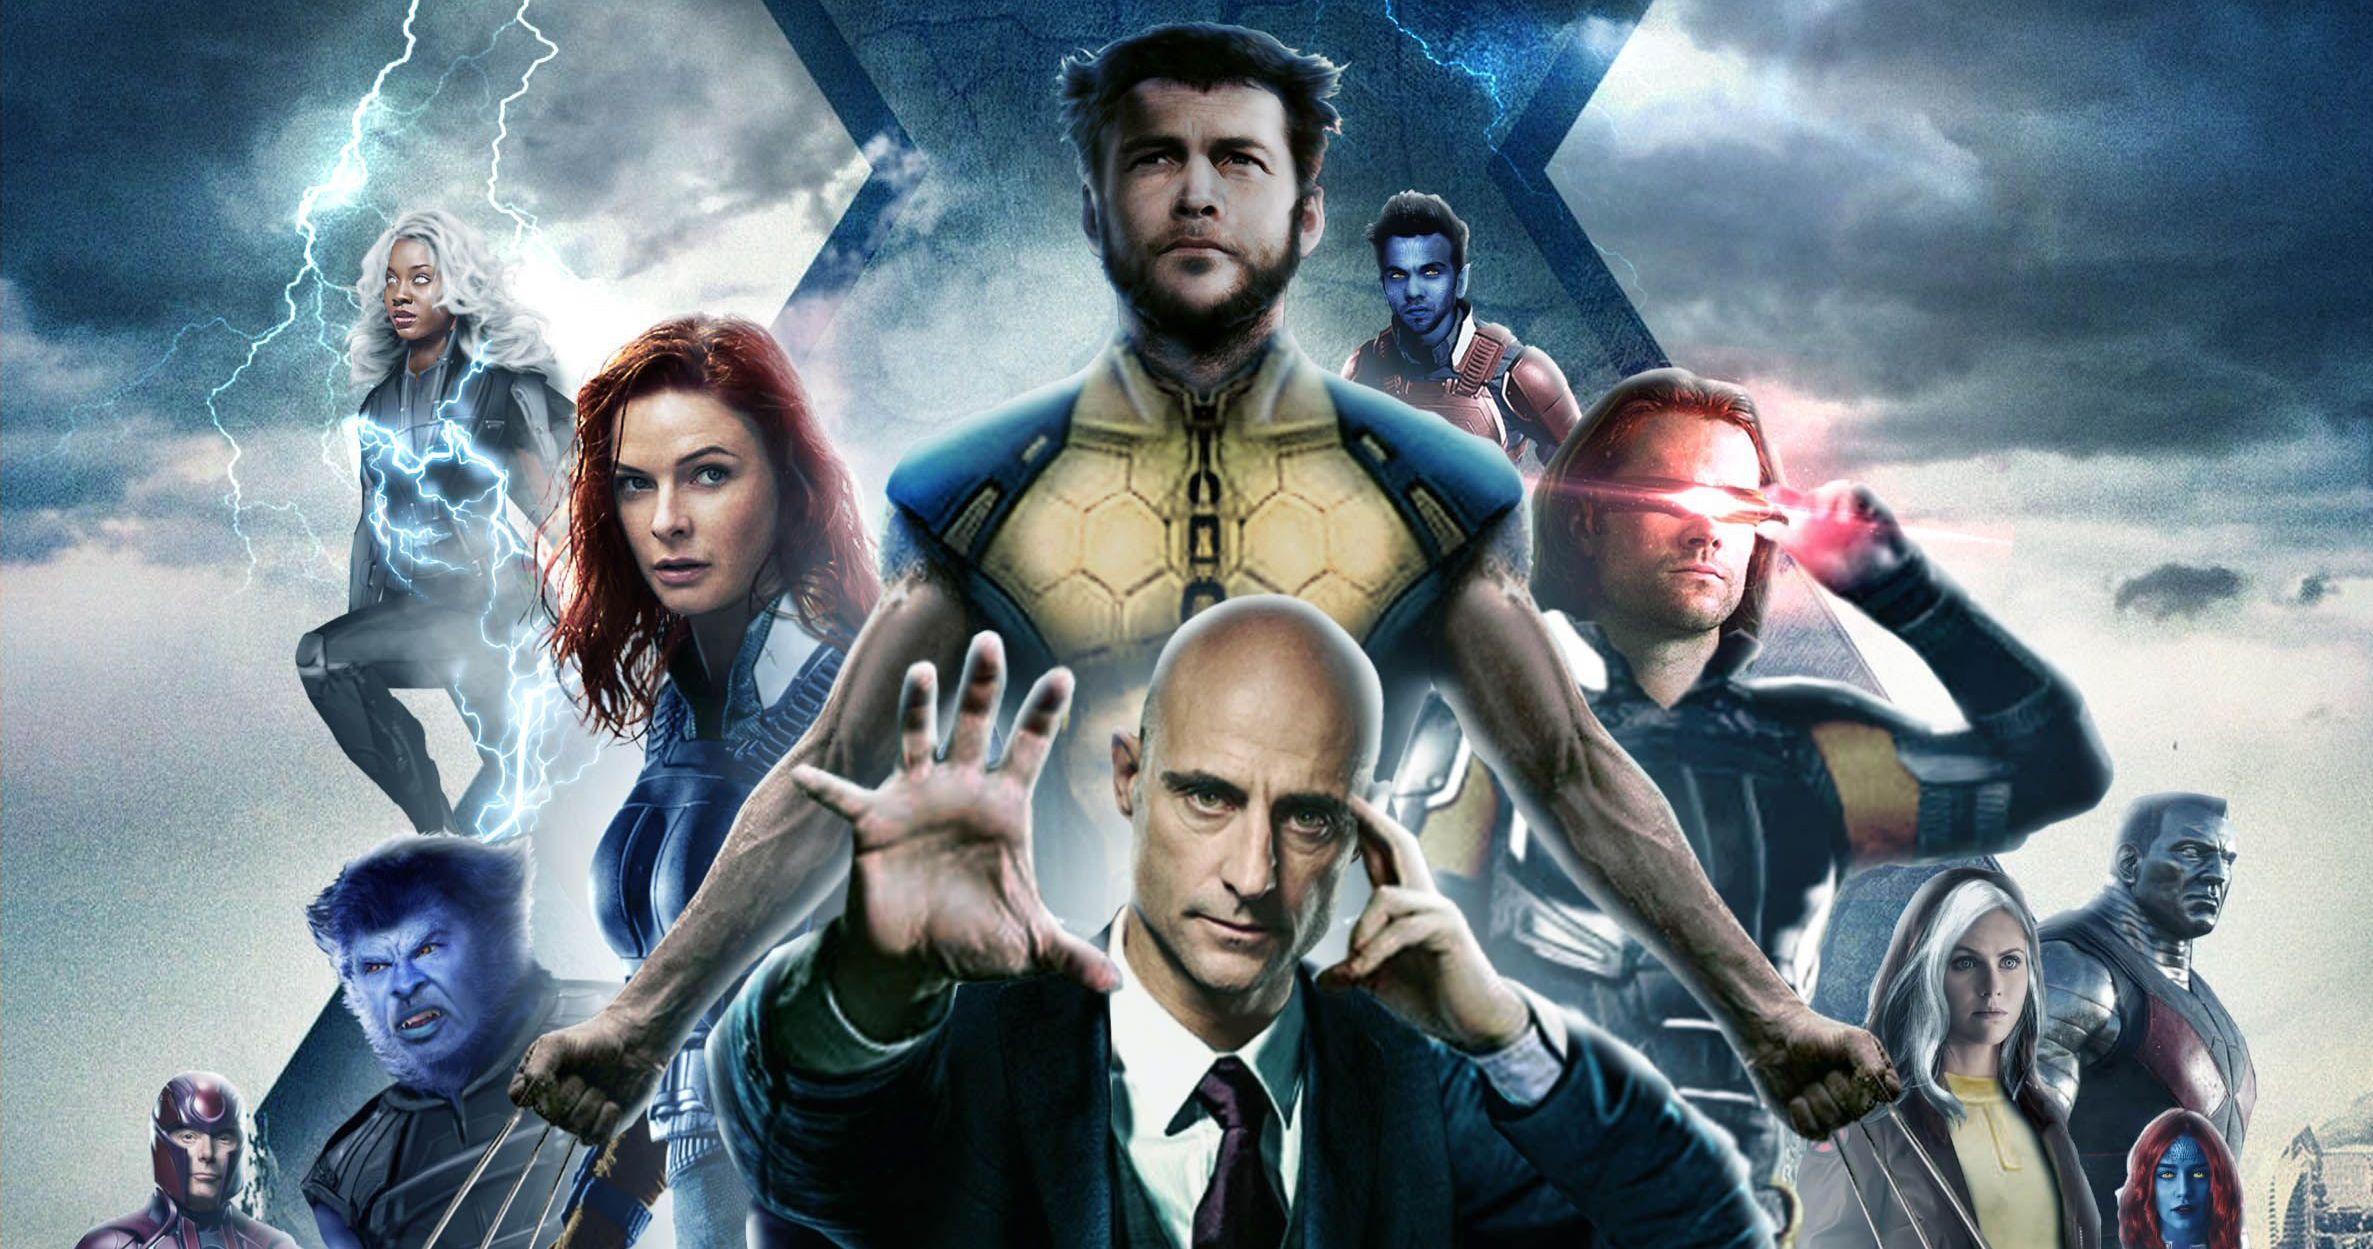 X-Men MCU Talks Have Been Long and Ongoing Amongst Marvel Studios Team